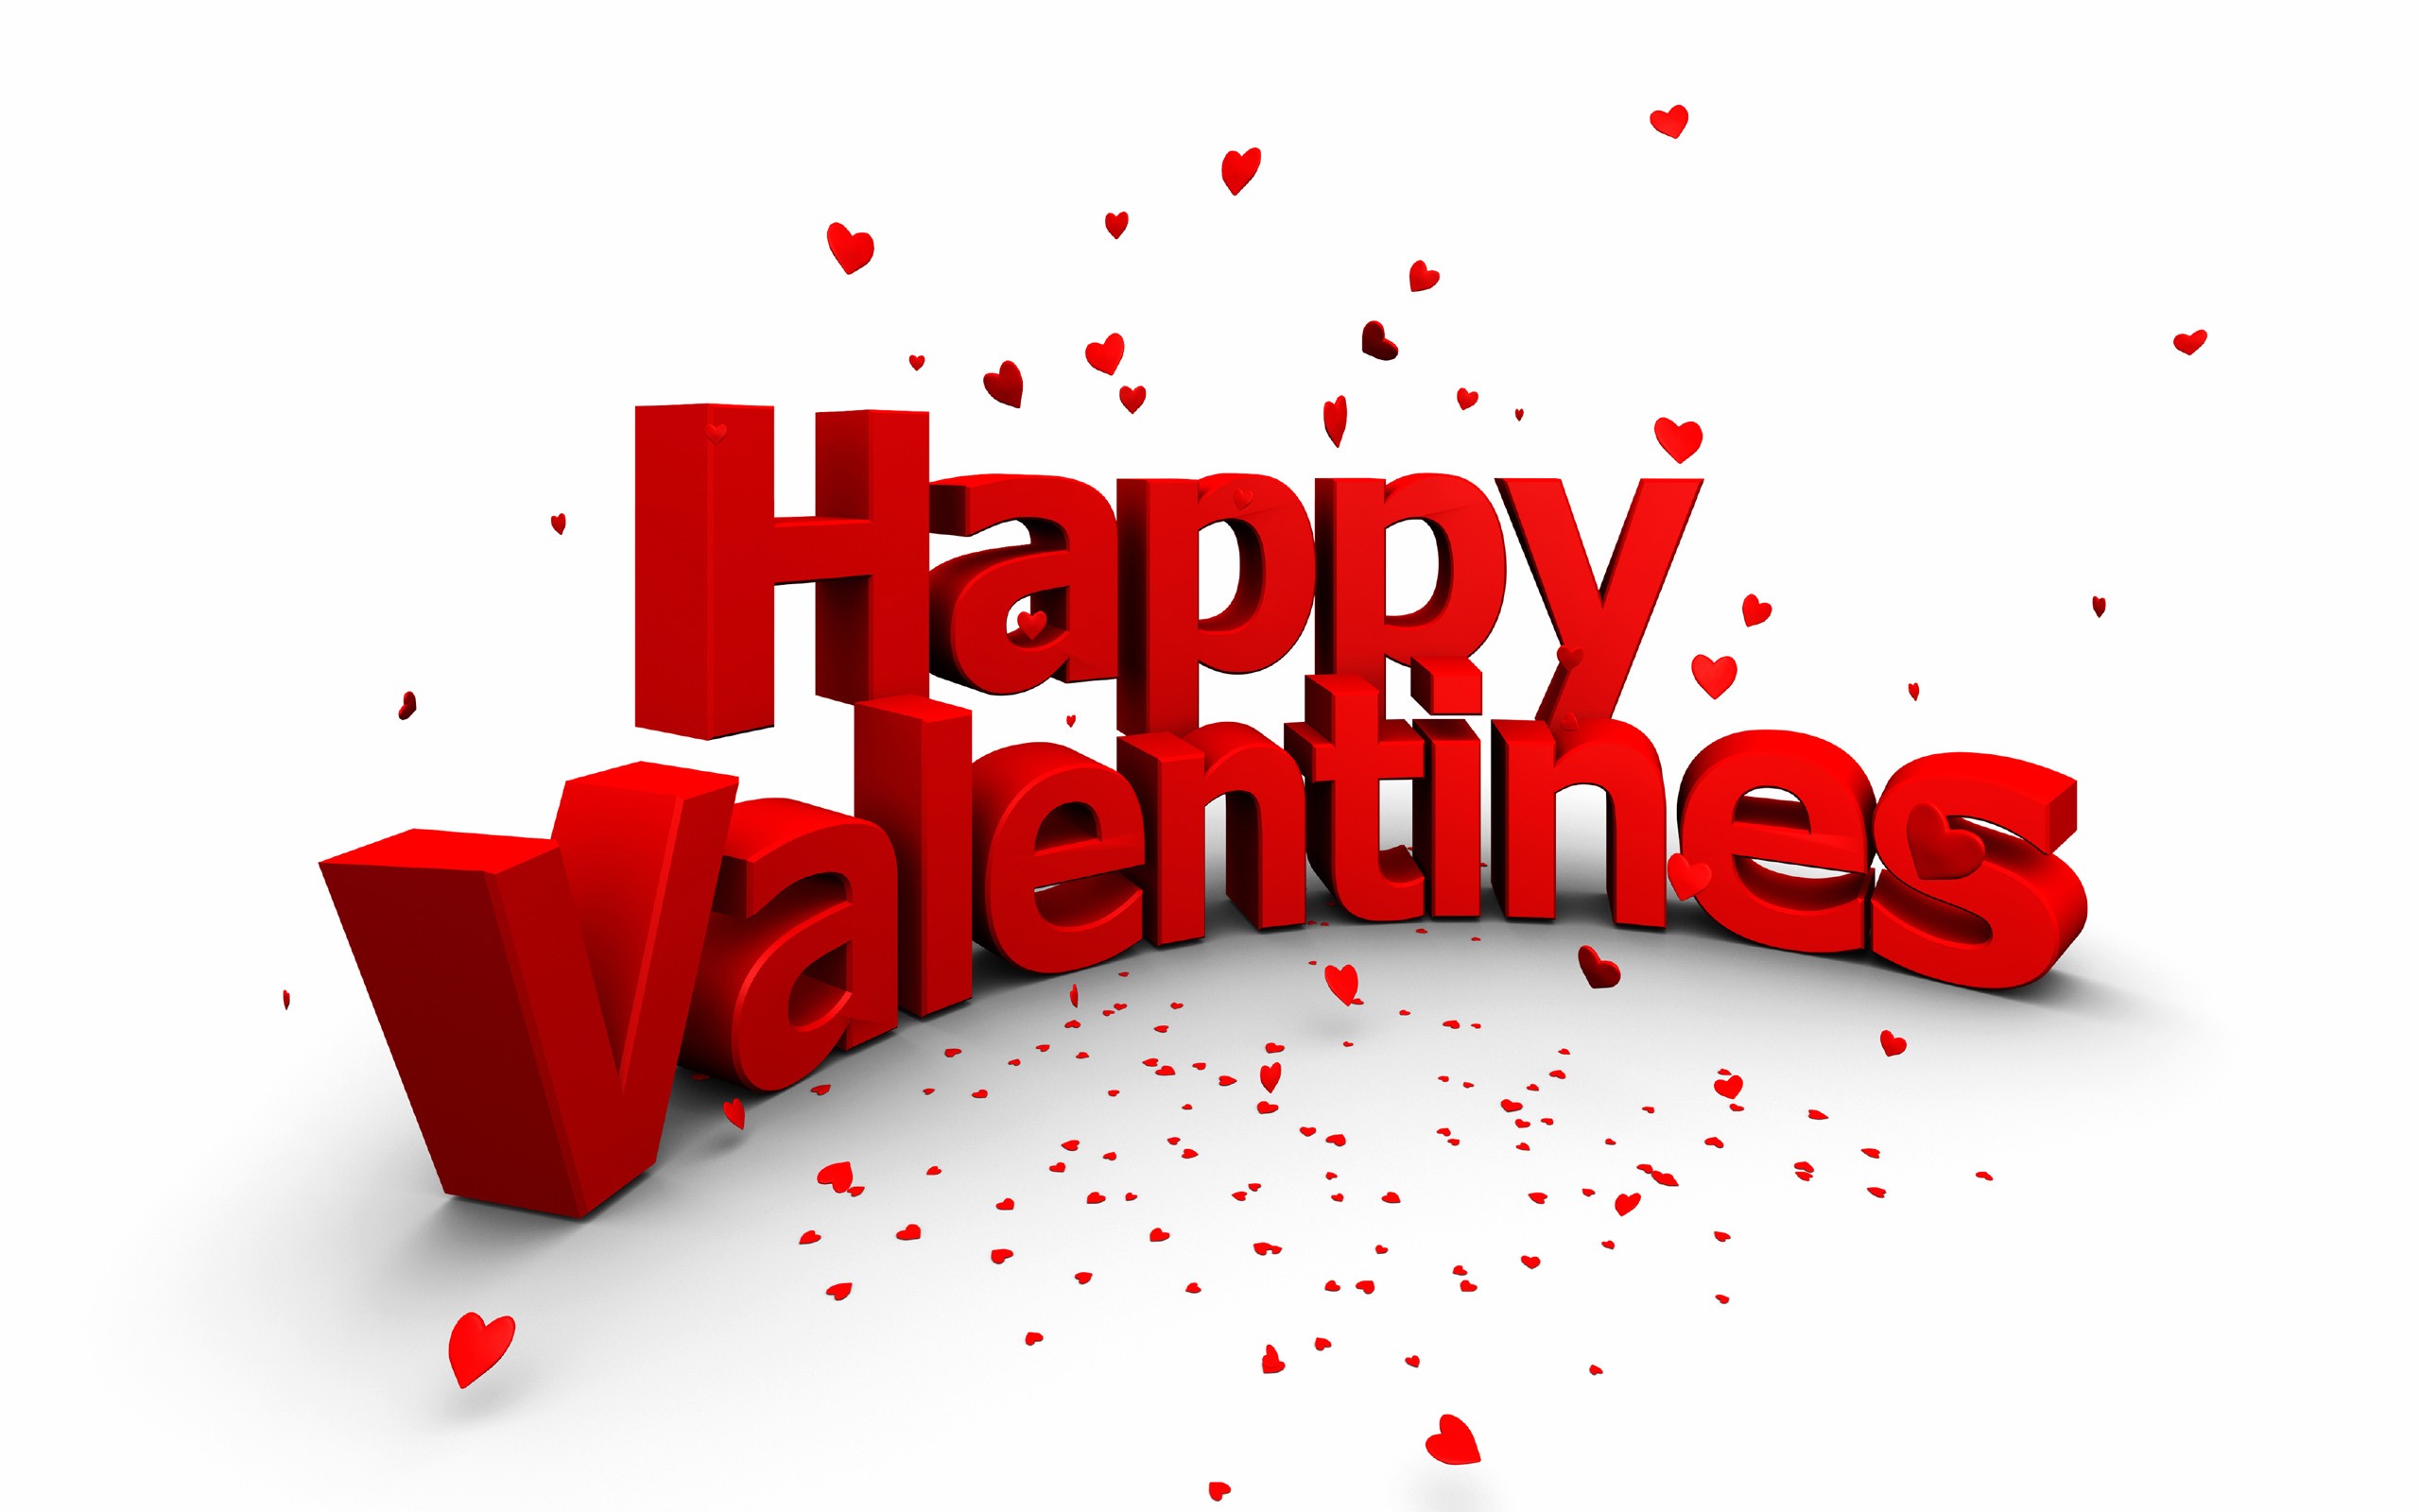 Amazing Valentine's Day Pictures & Backgrounds